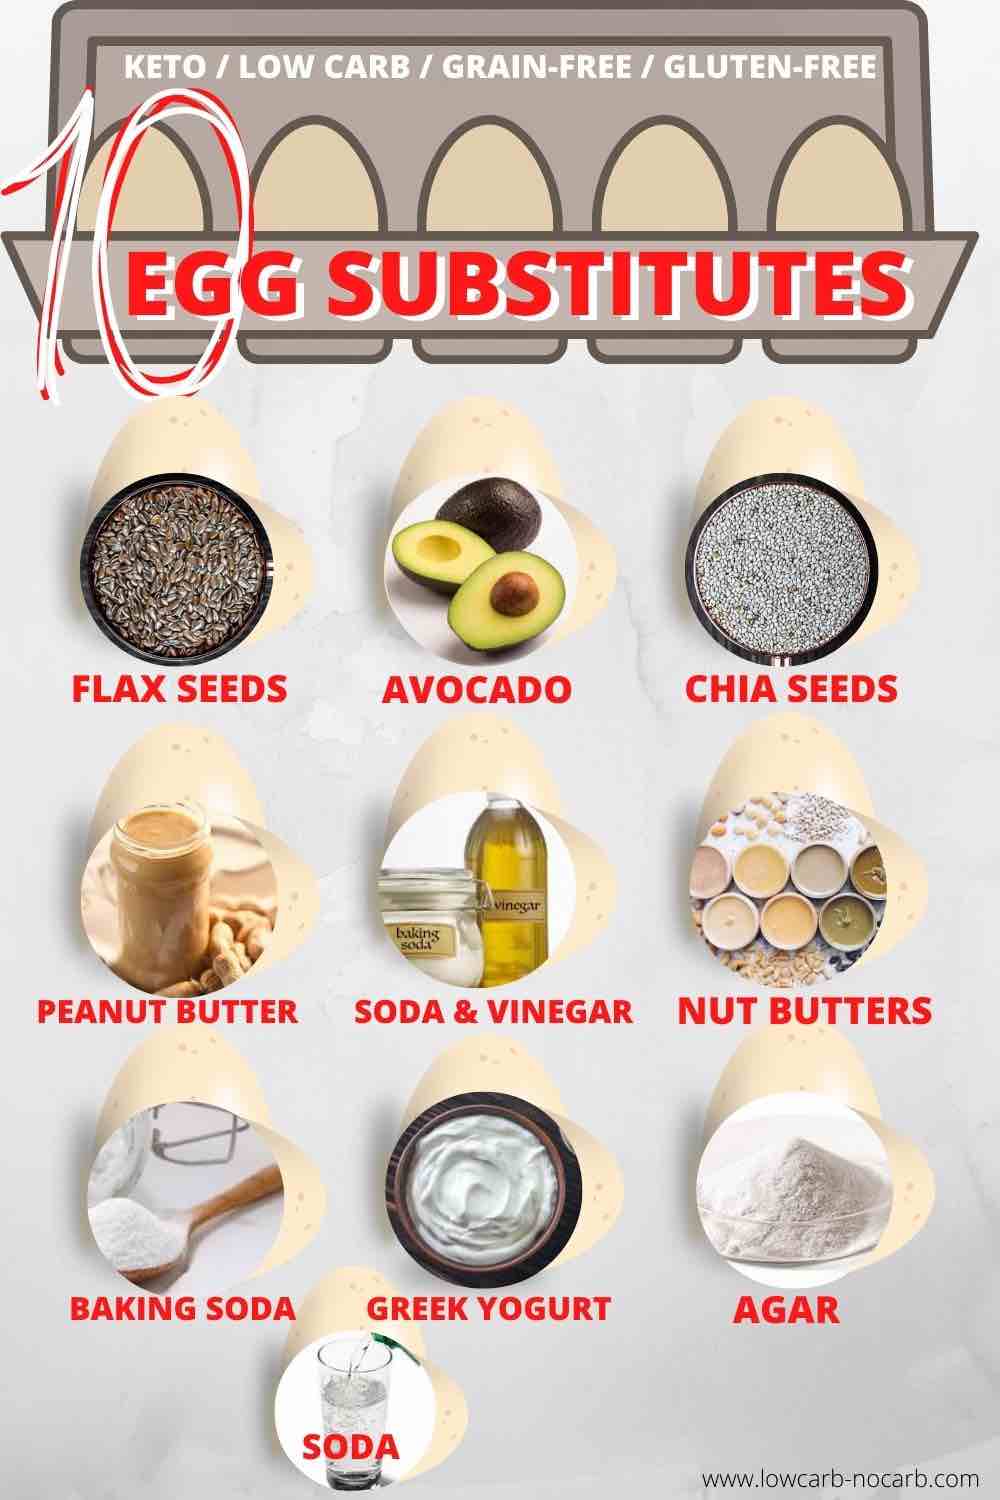 Egg Substitutions in Keto diet chart